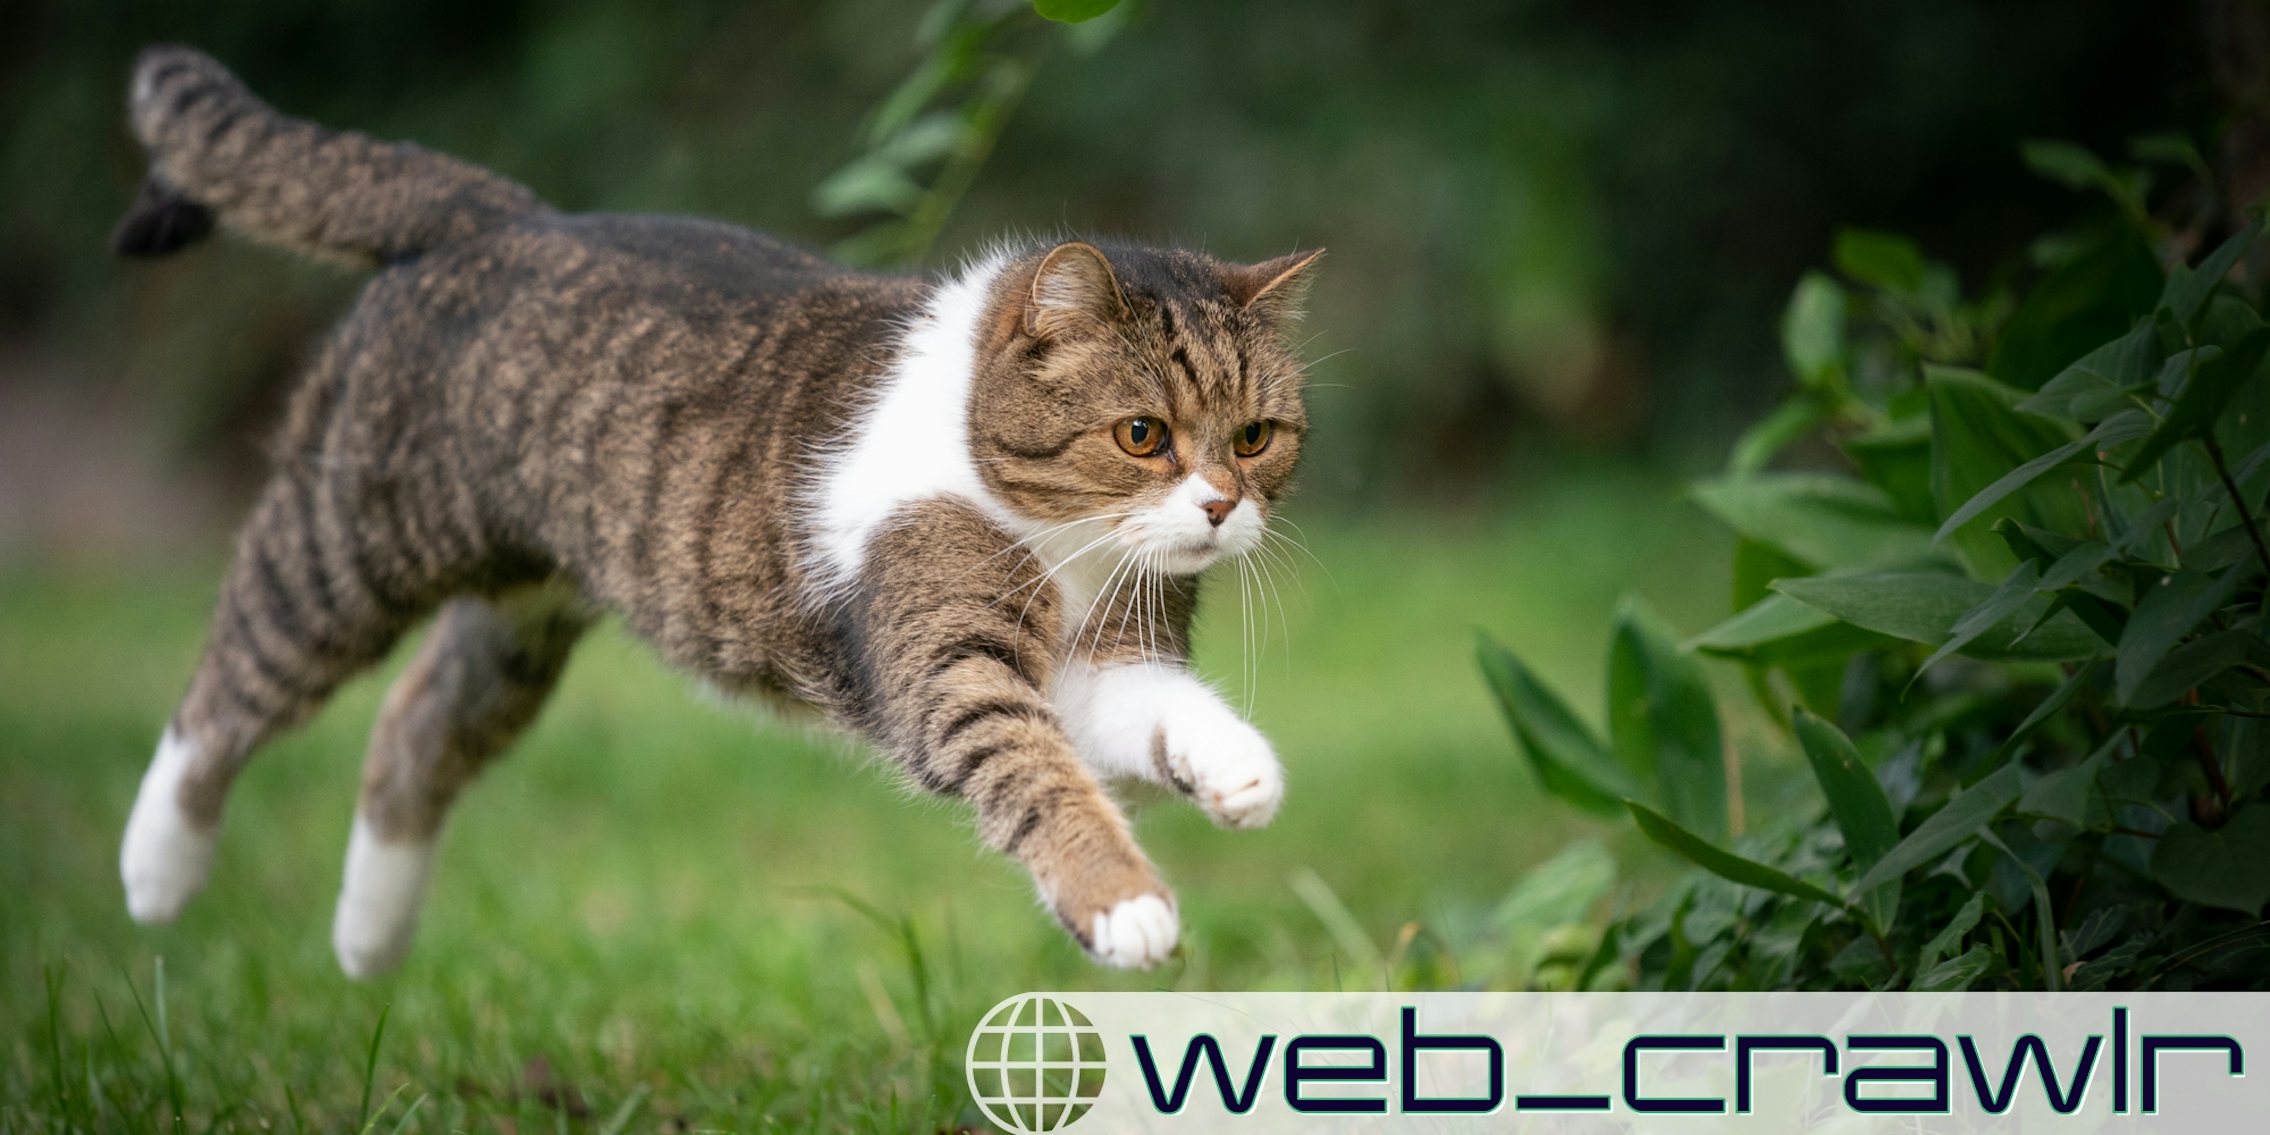 A cat jumping. The Daily Dot newsletter web_crawlr logo is in the bottom right corner.